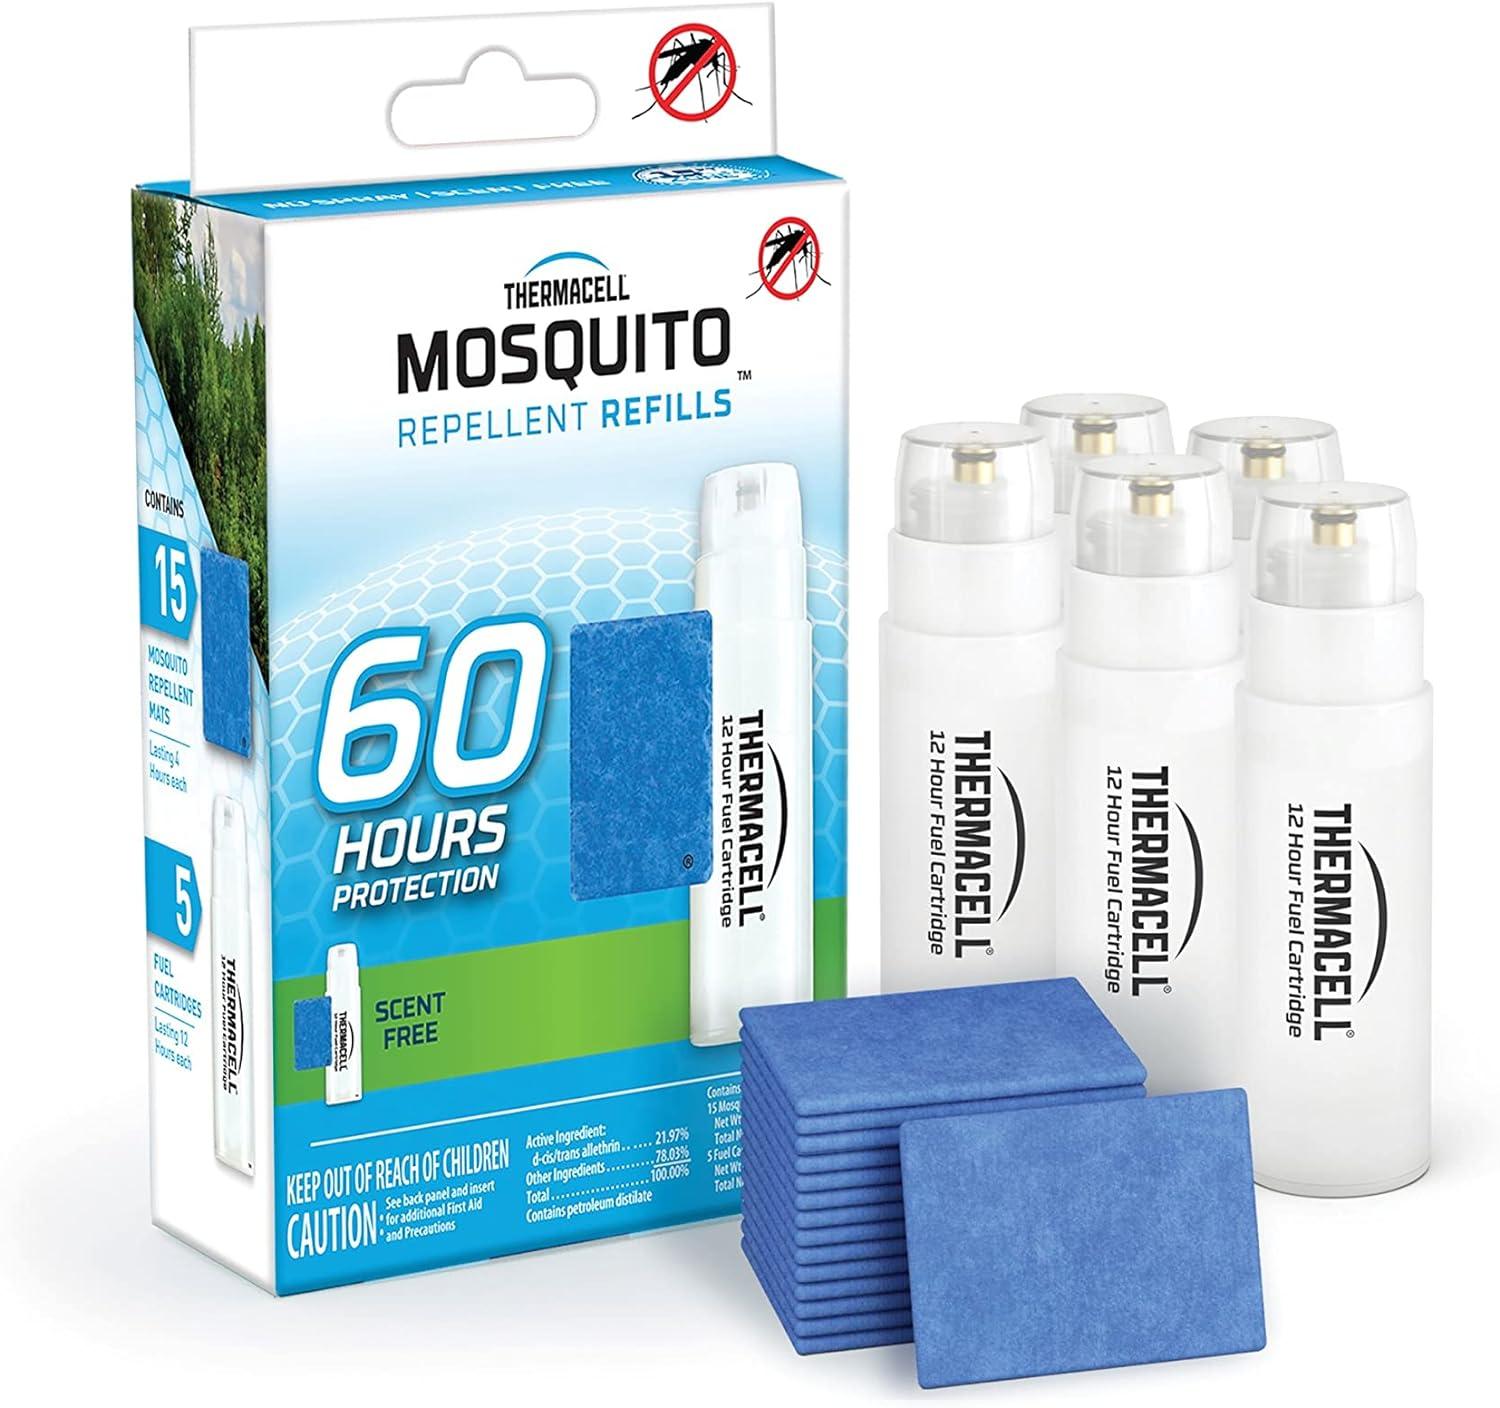 Thermacell Mosquito Repellent Refills for $7.94